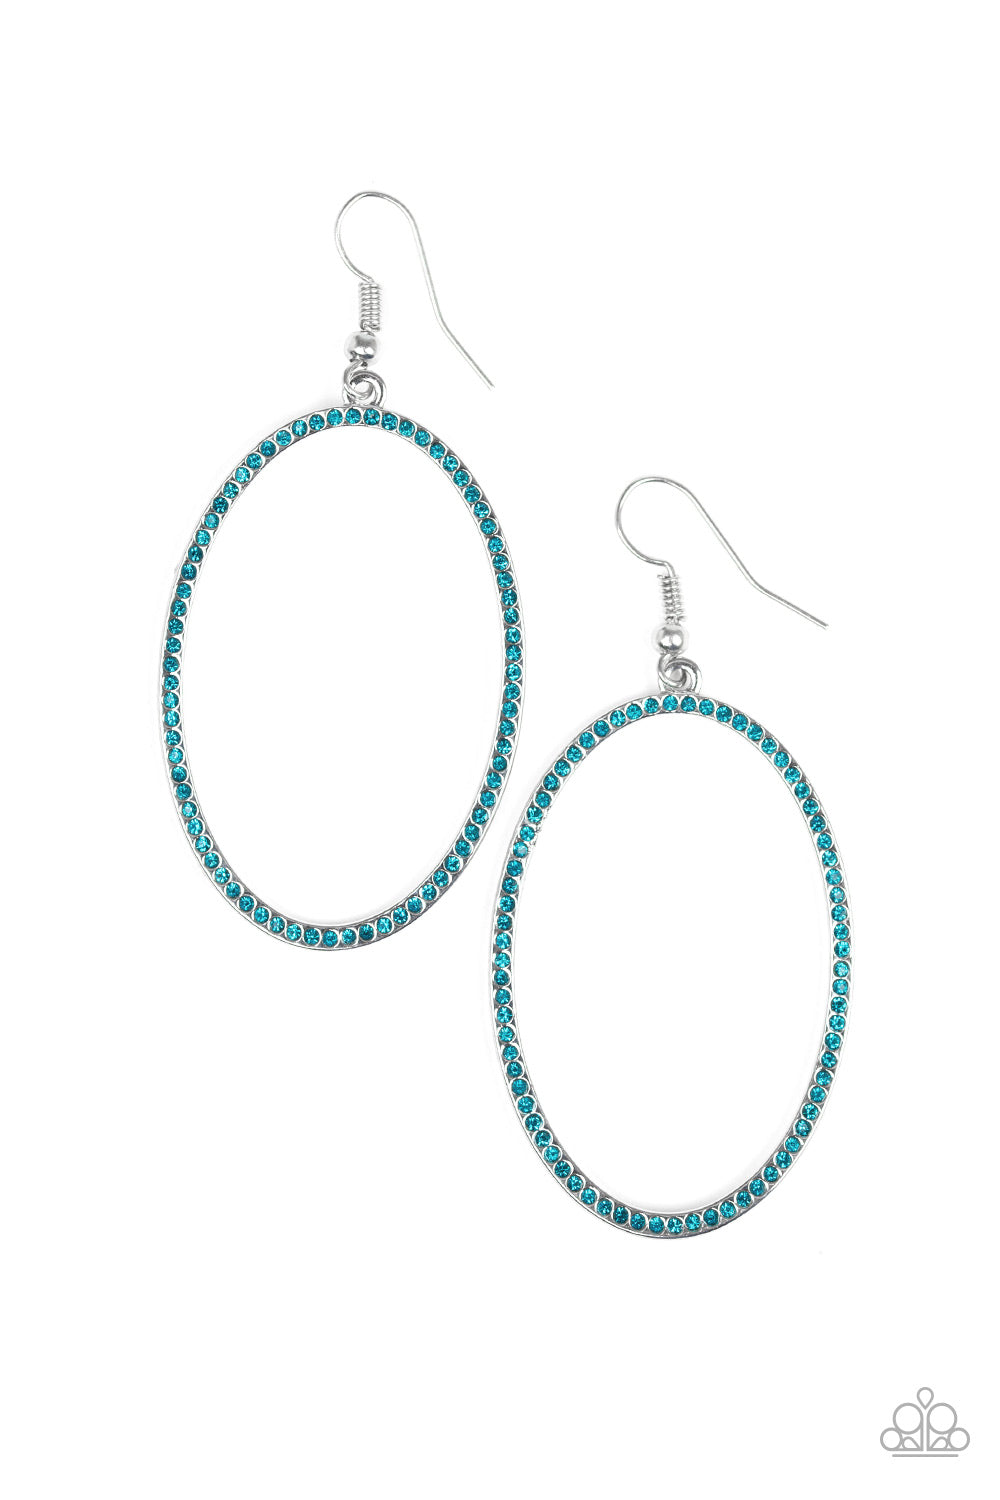 Dazzle On Demand - Blue Earrings - Paparazzi Accessories 